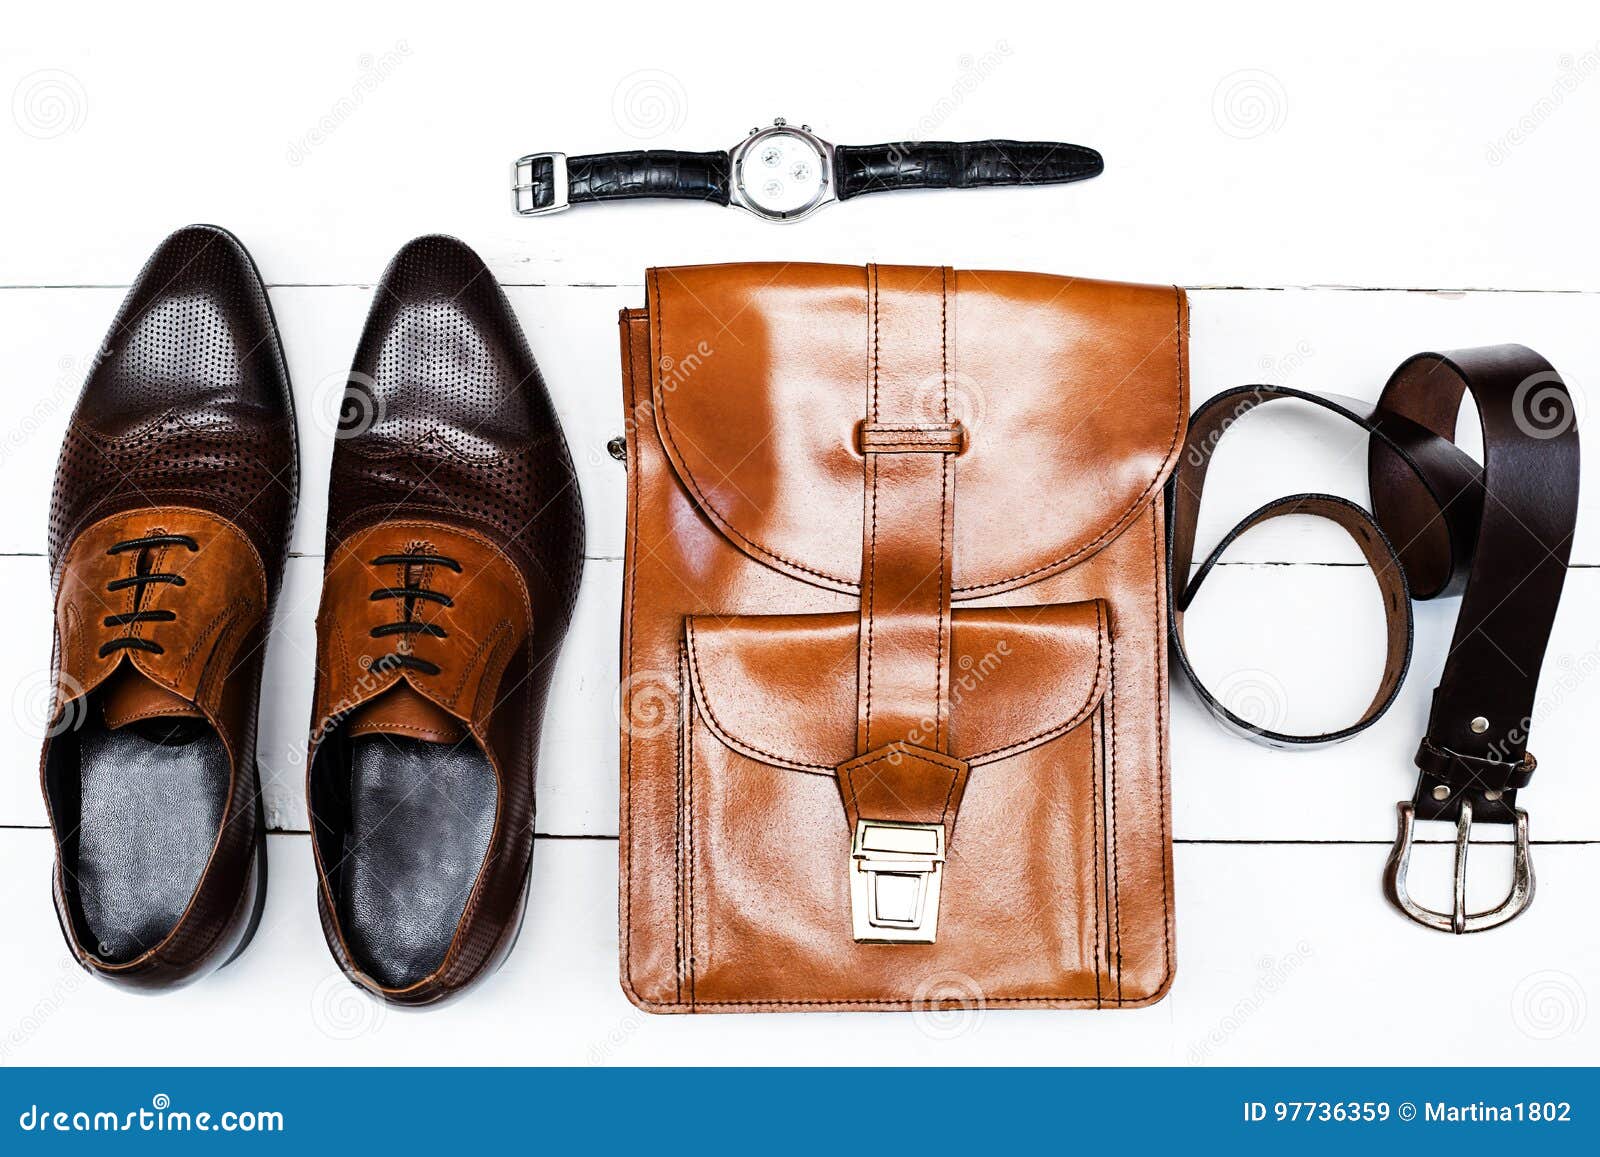 Stylish Mens Accessories on the Wooden Background Stock Image - Image ...